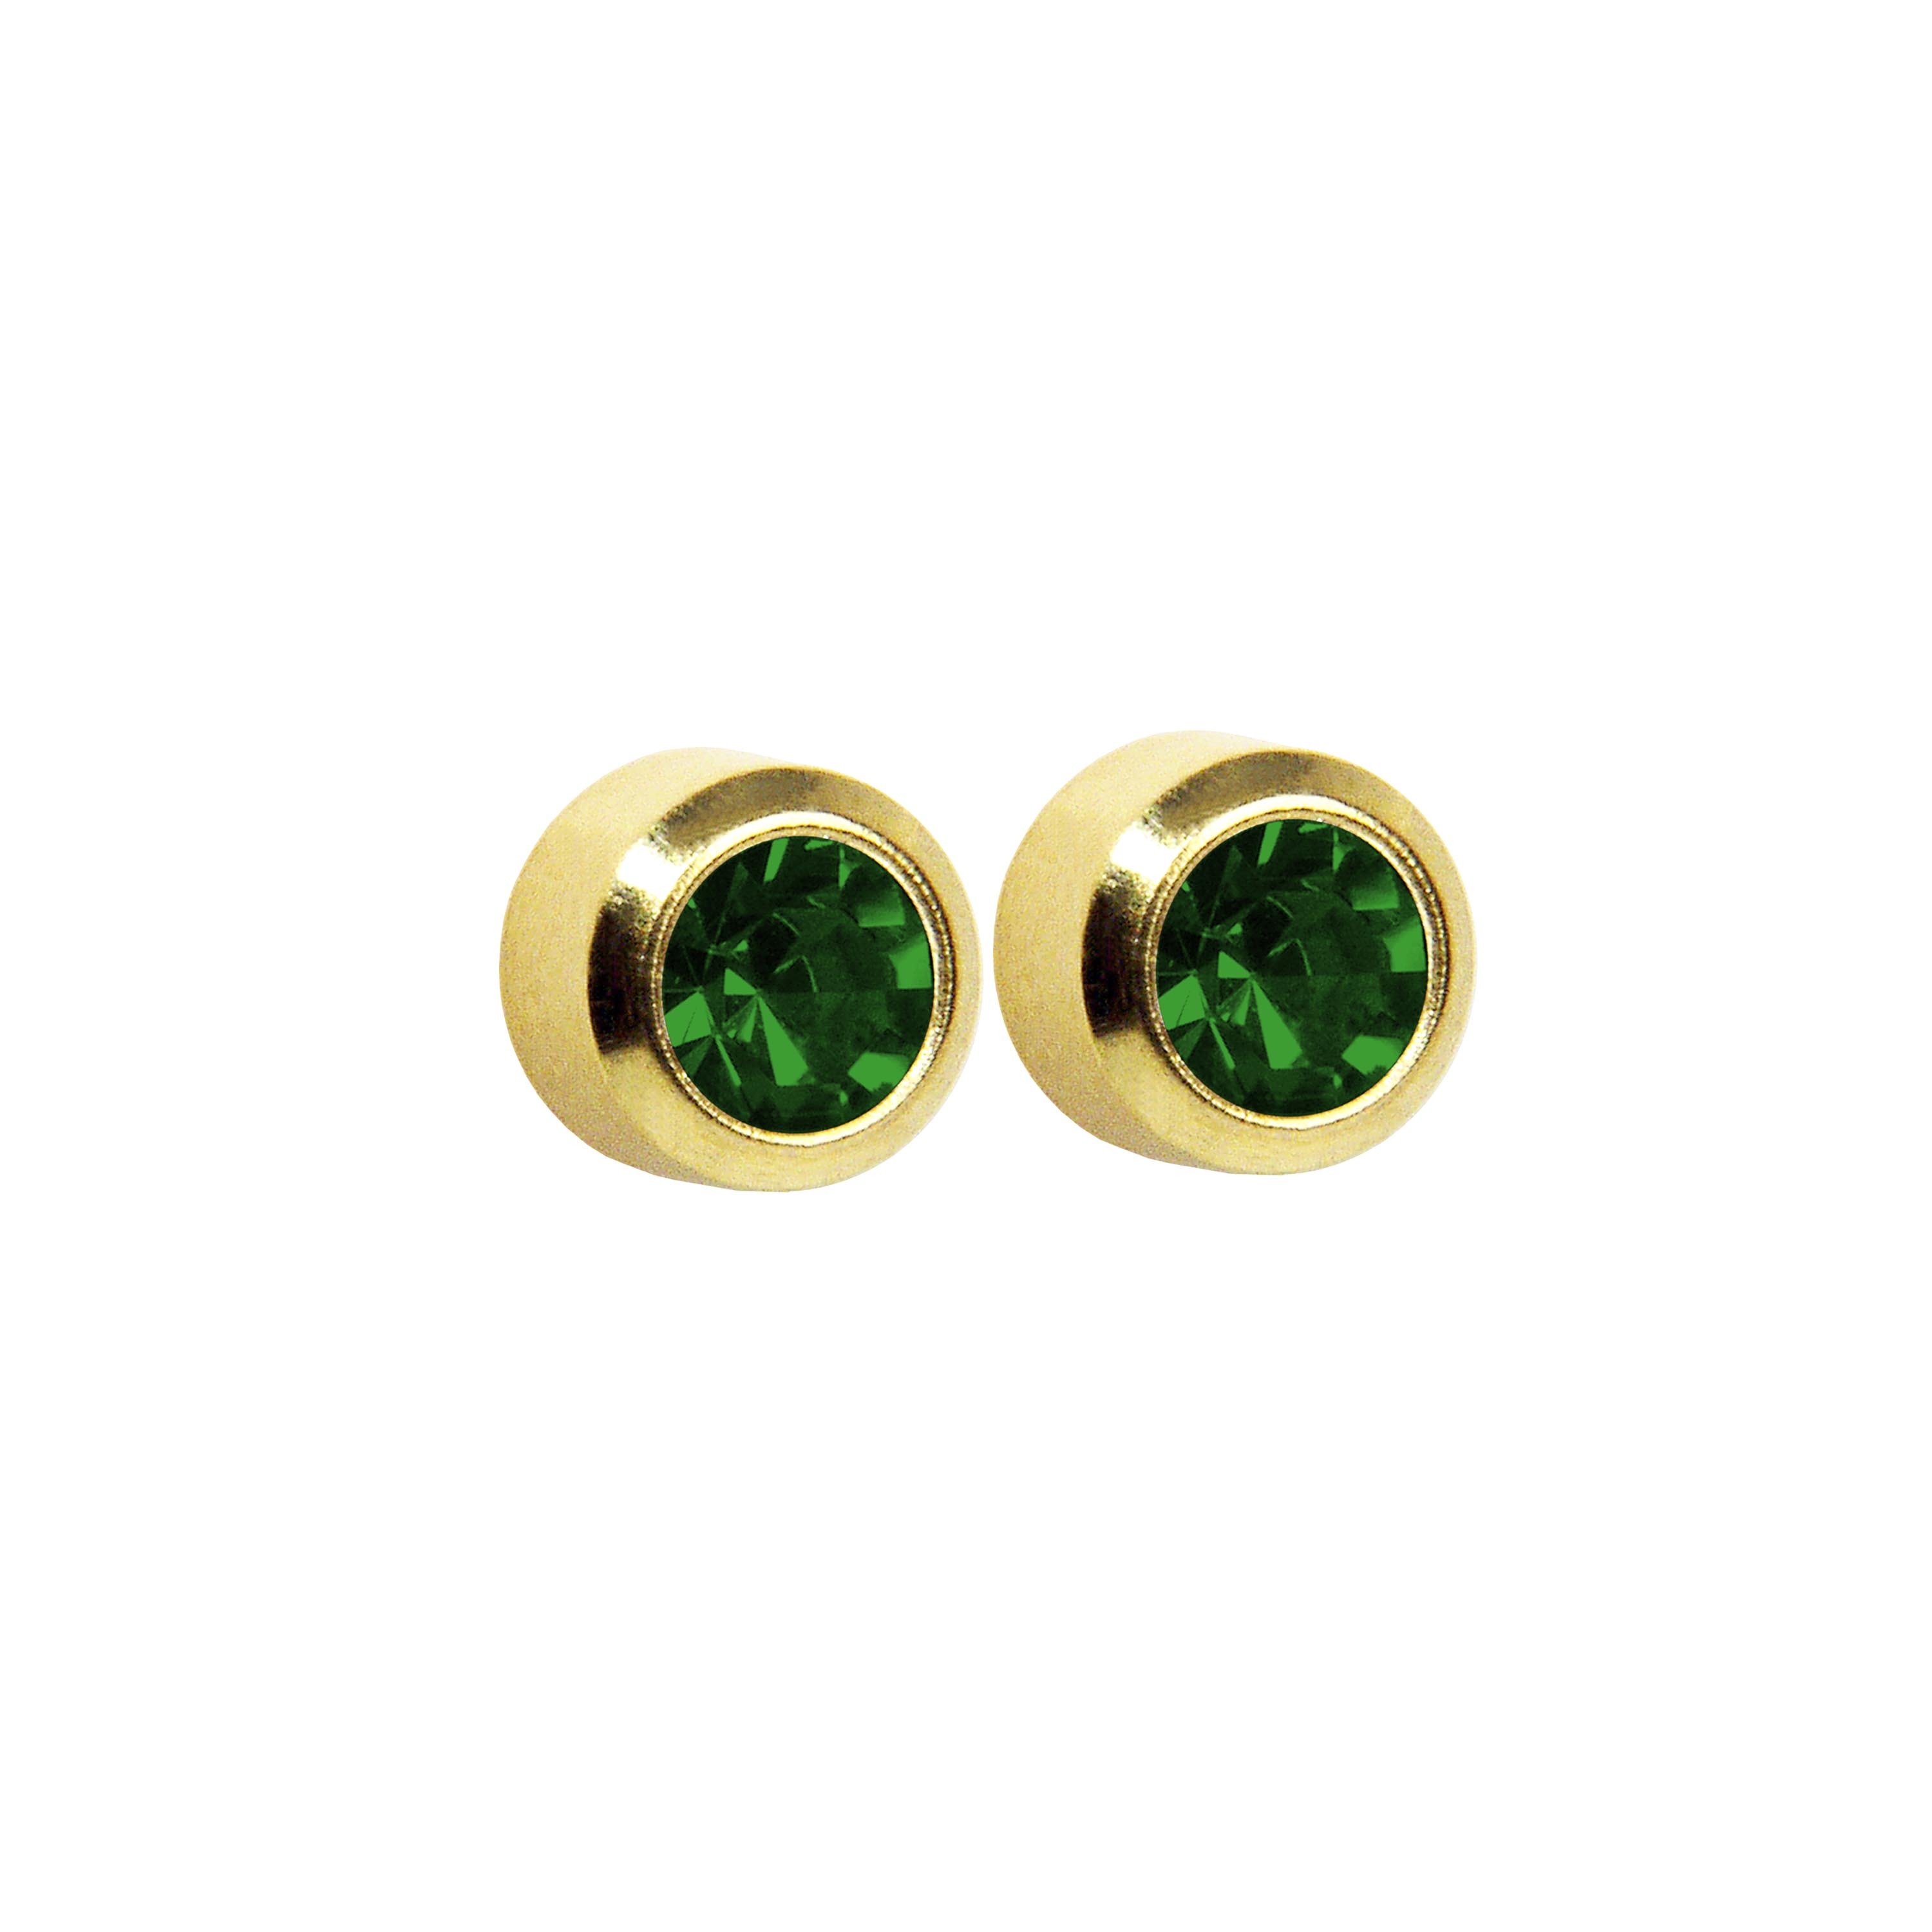 3MM - Bezel - Emerald - Green | 24K Gold Plated Piercing Ear Studs come Fashion Earrings | Studex Select